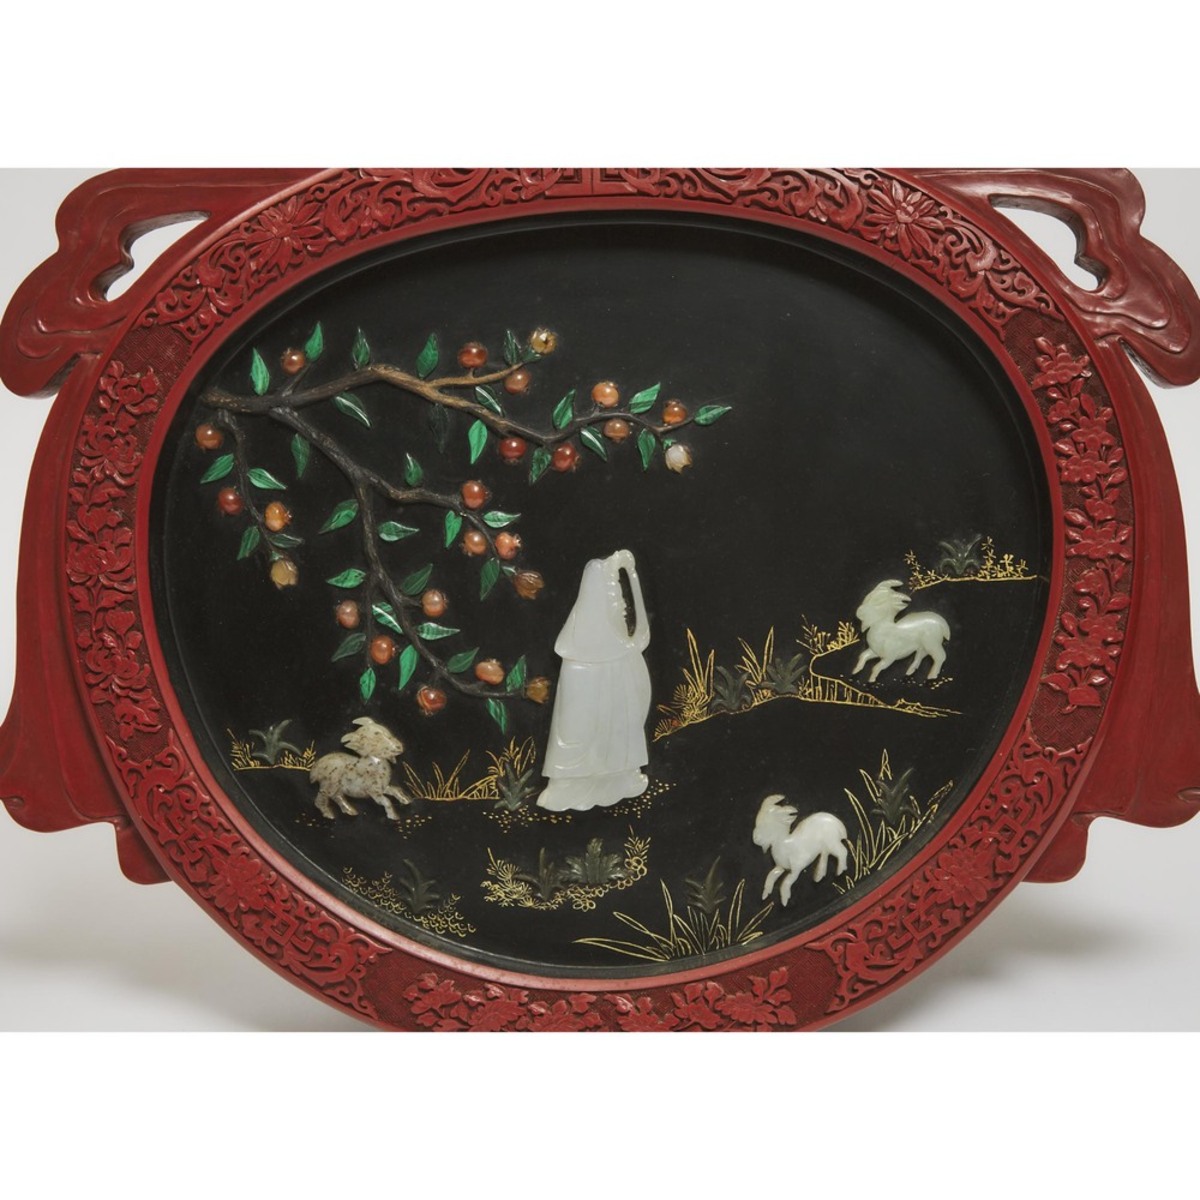 A Pair of Red Lacquer Panels Inlaid With Jade and Precious Stones, 19th Century, 清 十九世纪 剔红嵌宝挂屏一对, he - Image 4 of 6